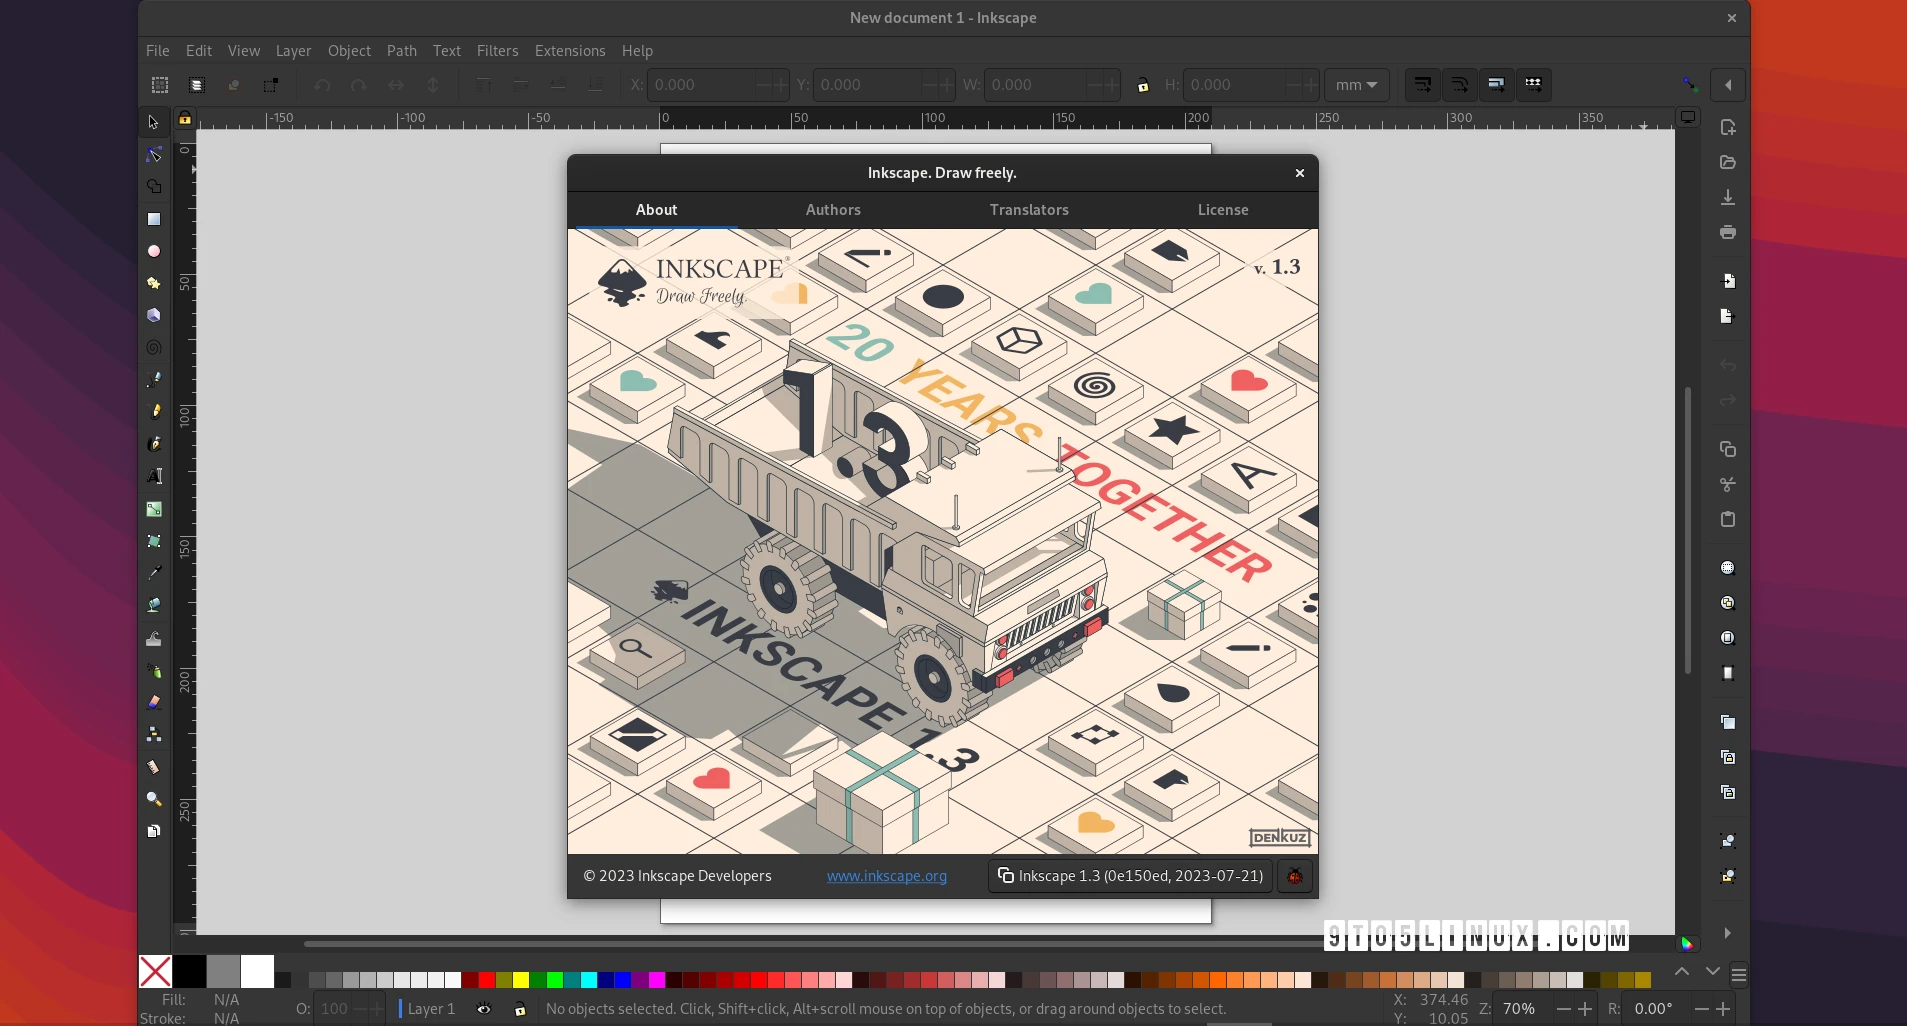 Inkscape 1.3 Open-Source SVG Editor Is Out with New Shape Builder Tool, Many Changes